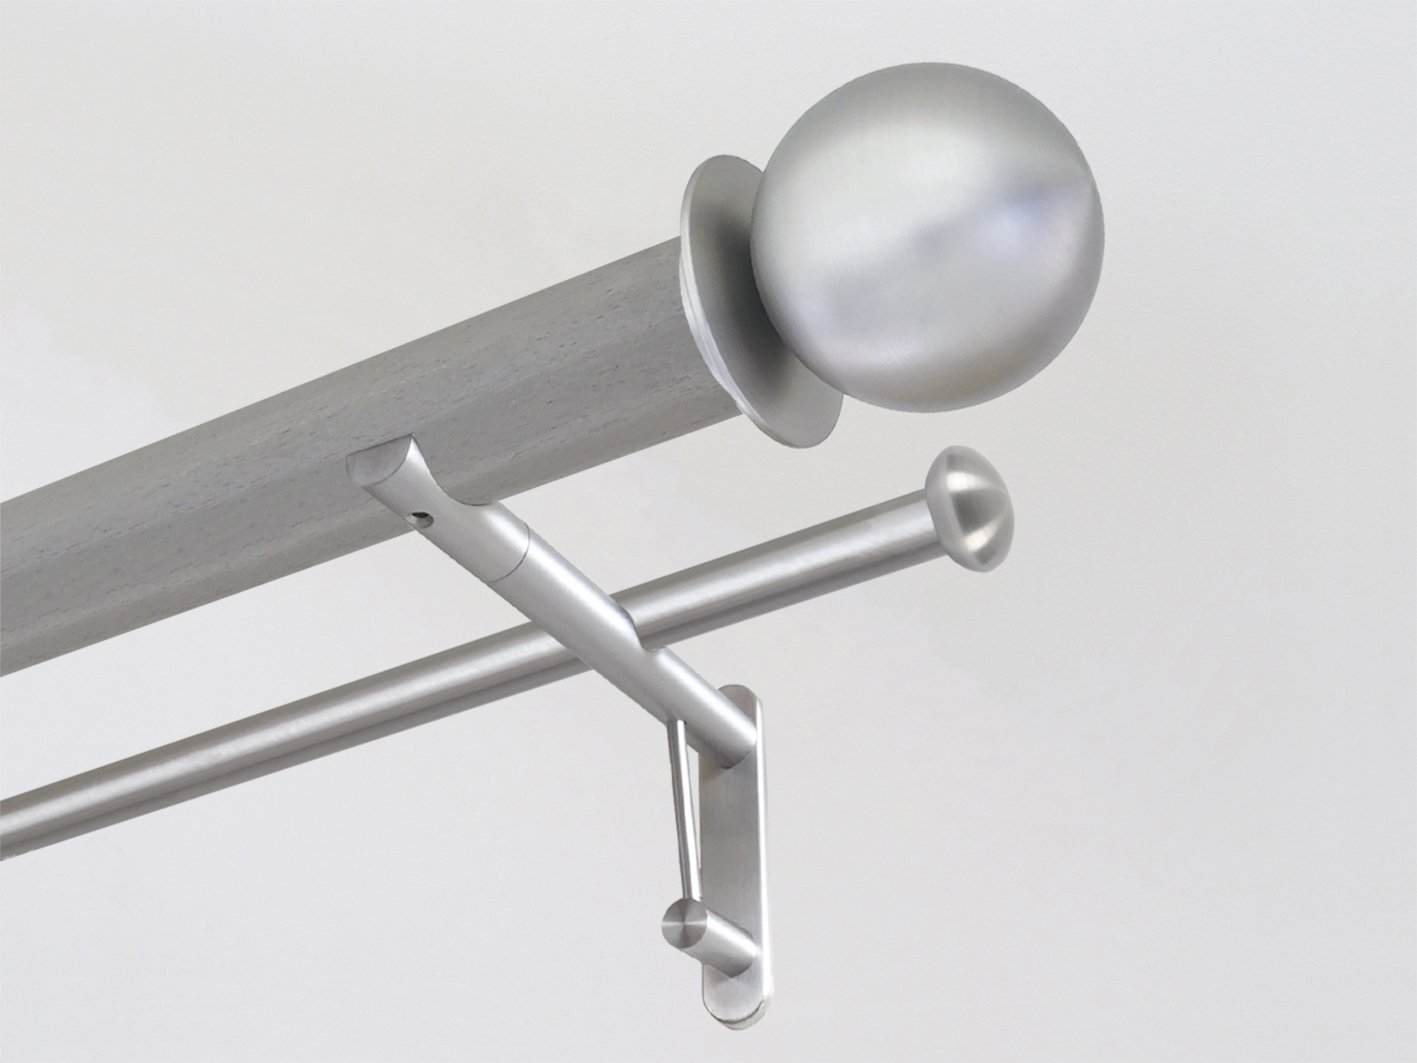 50mm dia. mouse stained wood double curtain pole with brushed steel metal ball finials